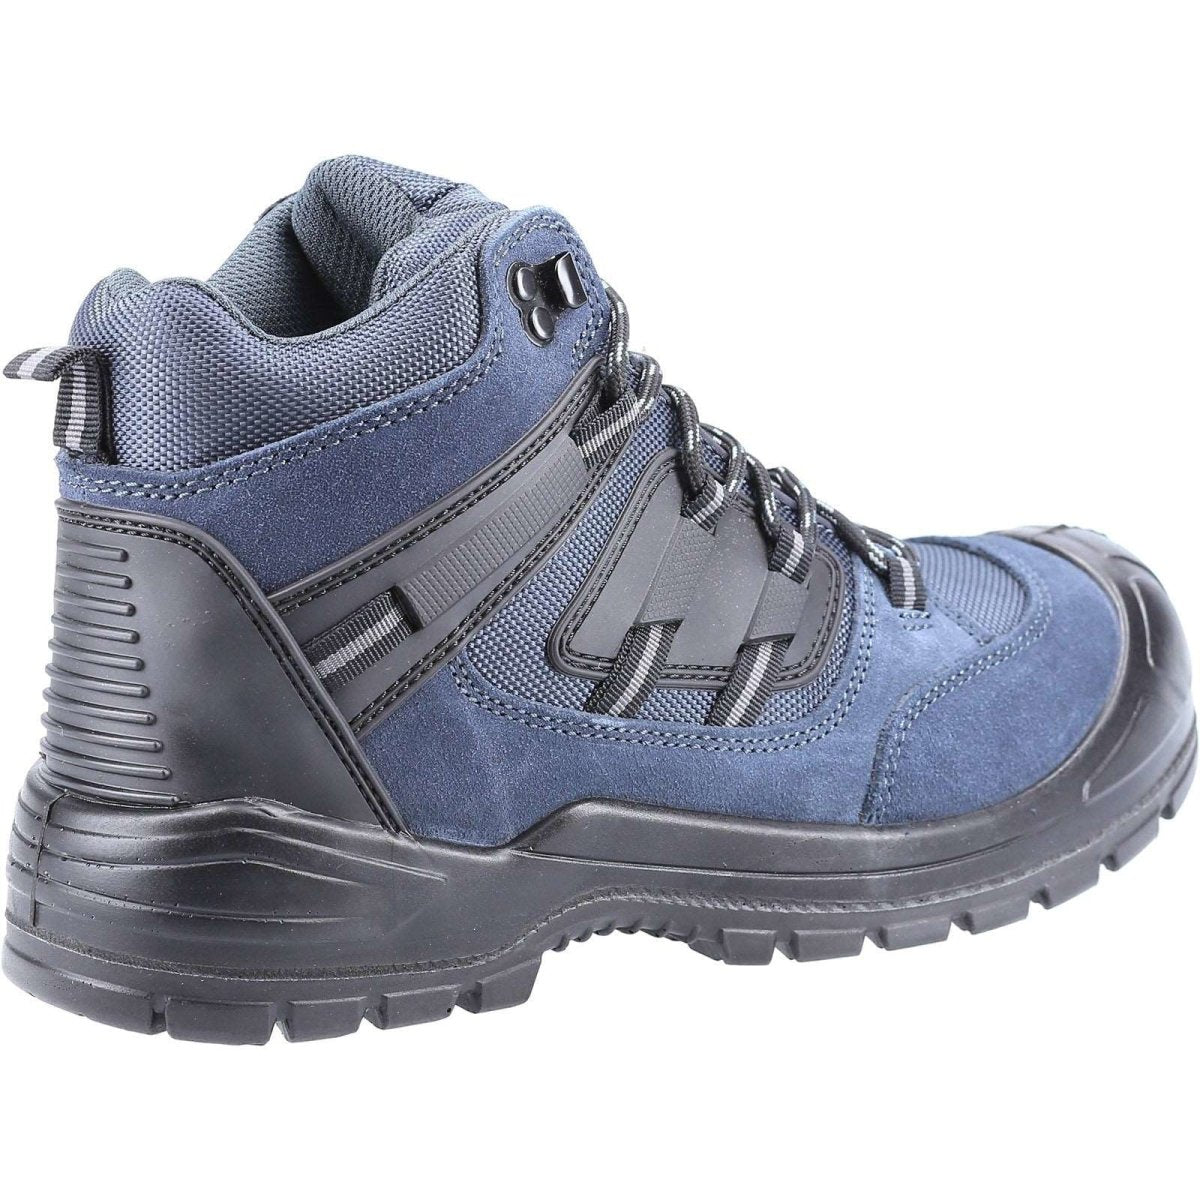 Amblers AS257 Steel Toe Cap Lightweight Mens Safety Hiker Boots - Shoe Store Direct